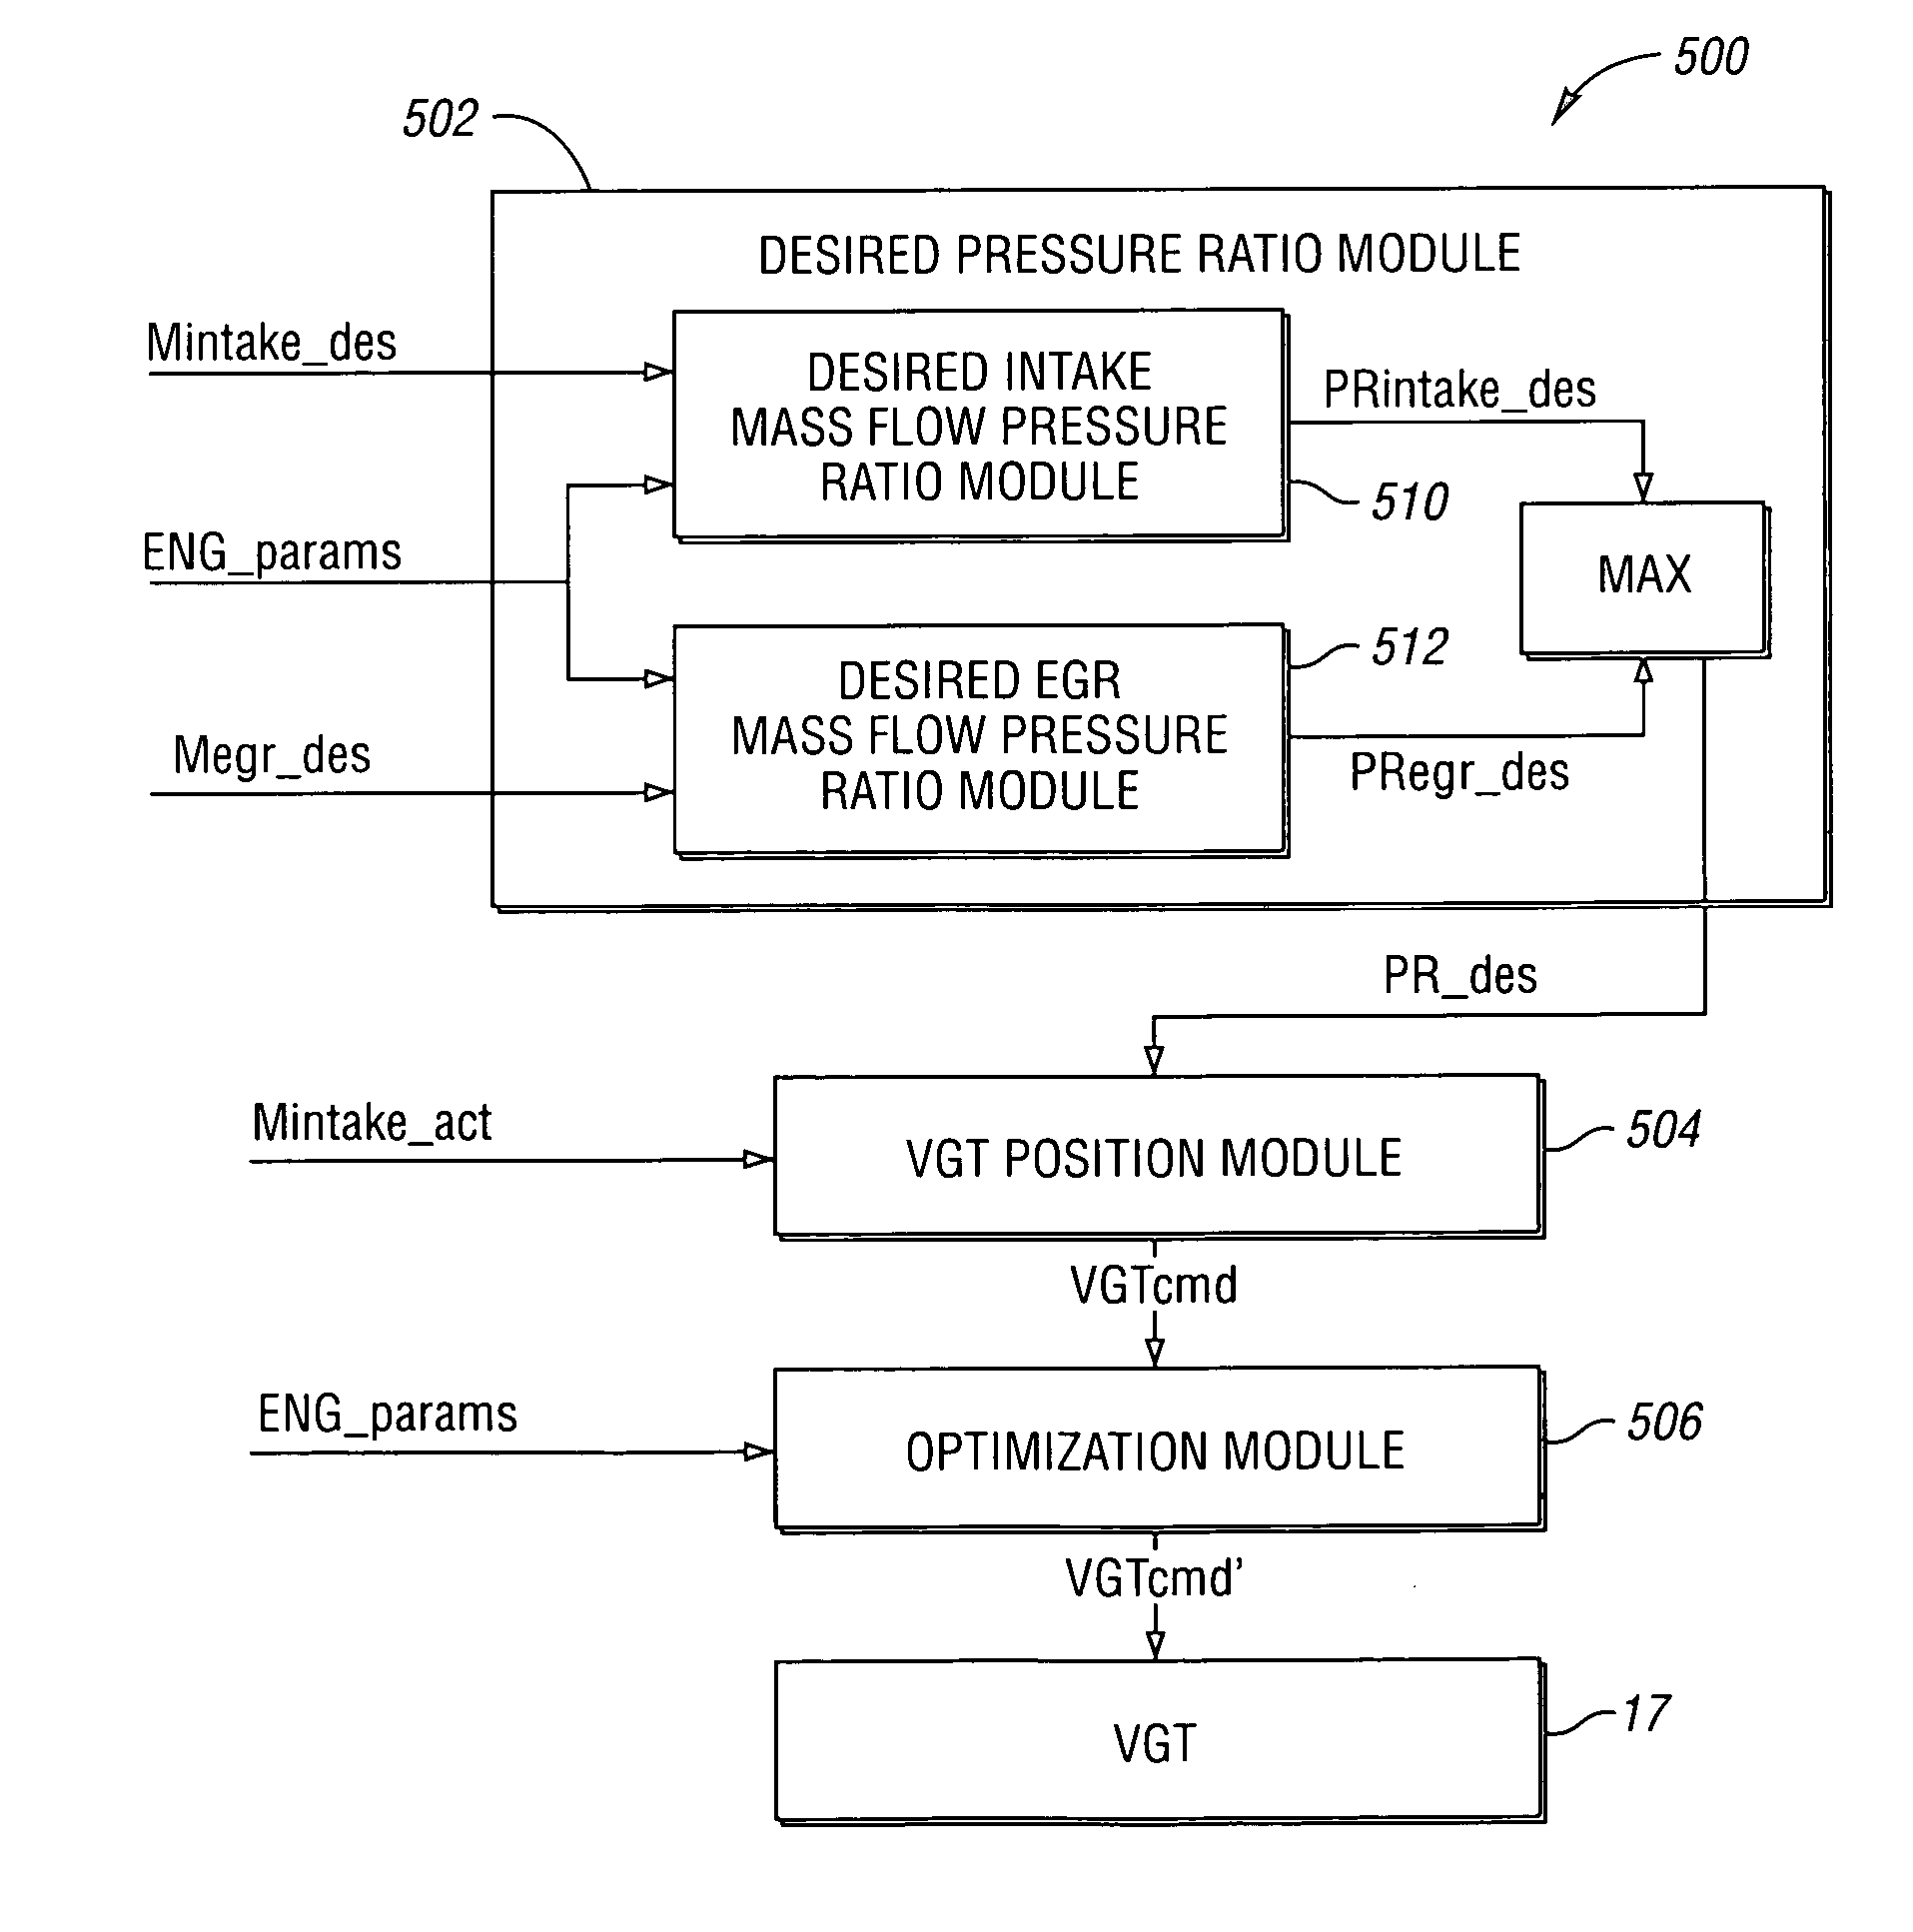 Method for controlling an internal combustion engine using model based VGT/EGR control